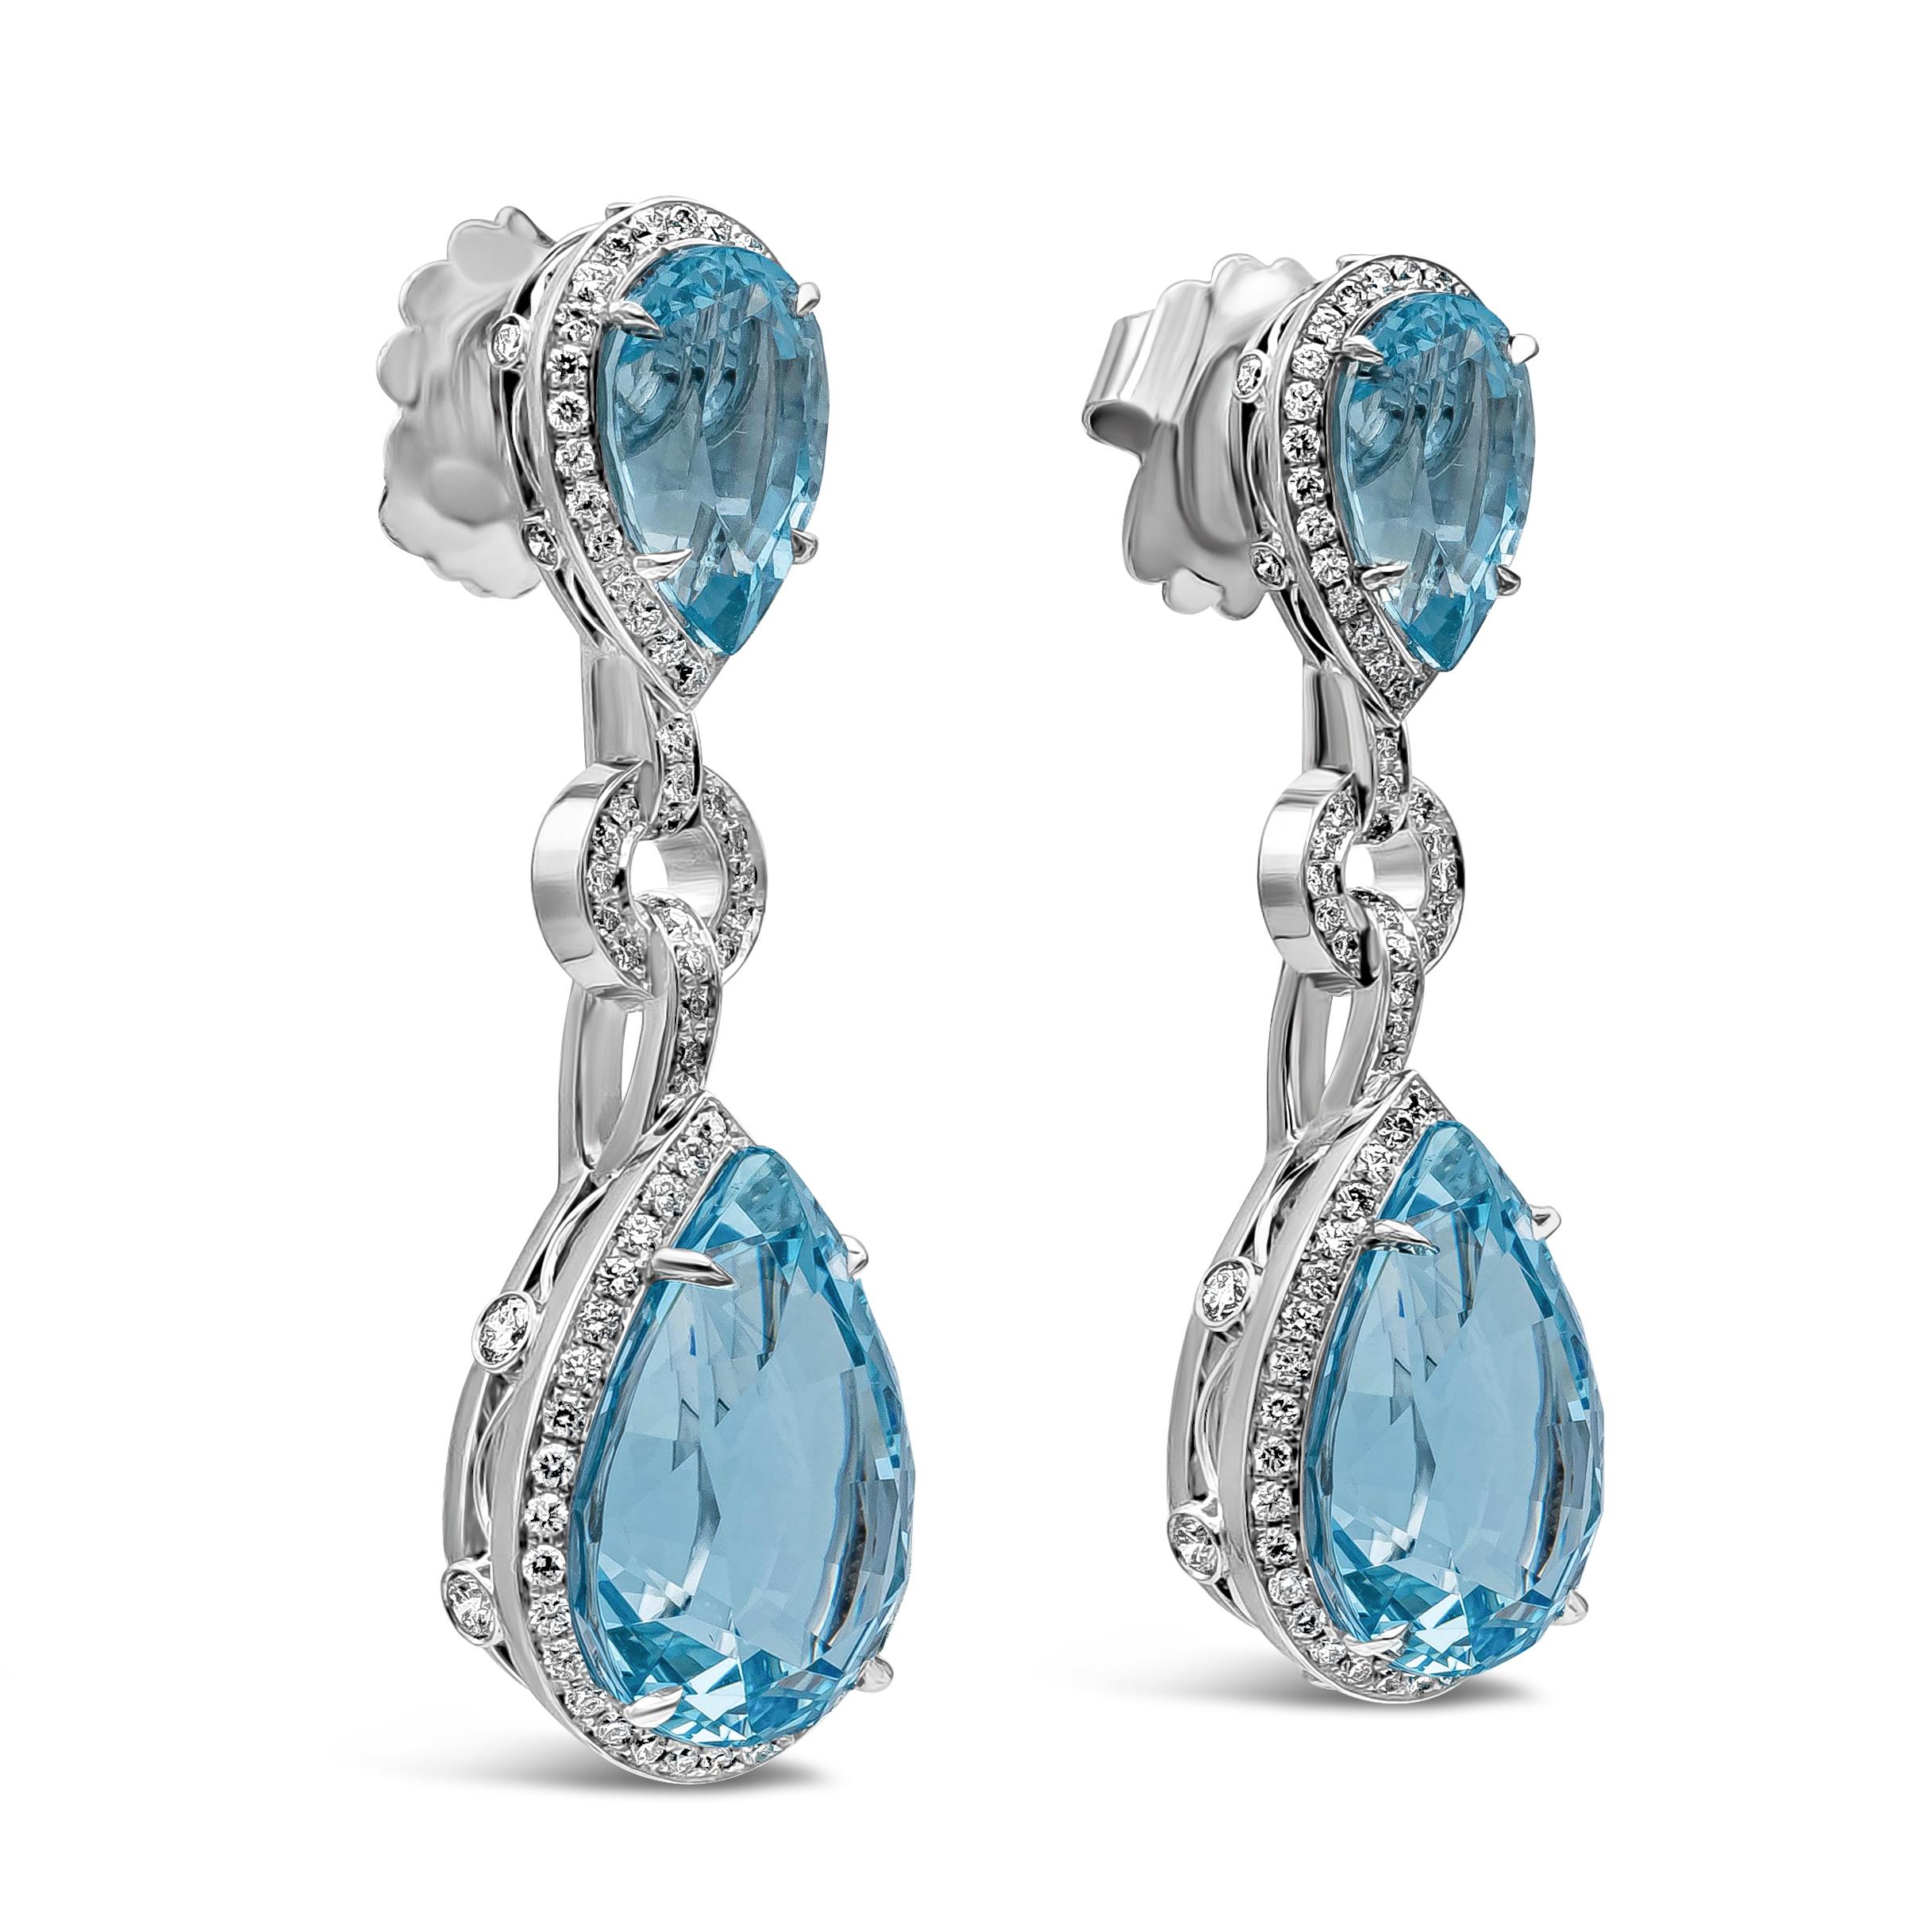 A beautiful pair of dangle earrings showcasing pear shape aquamarines weighing 15.79 carats total, surrounded by a row of round brilliant diamonds weighing 0.91 carats total. Made with 18K White Gold.

Roman Malakov is a custom house, specializing